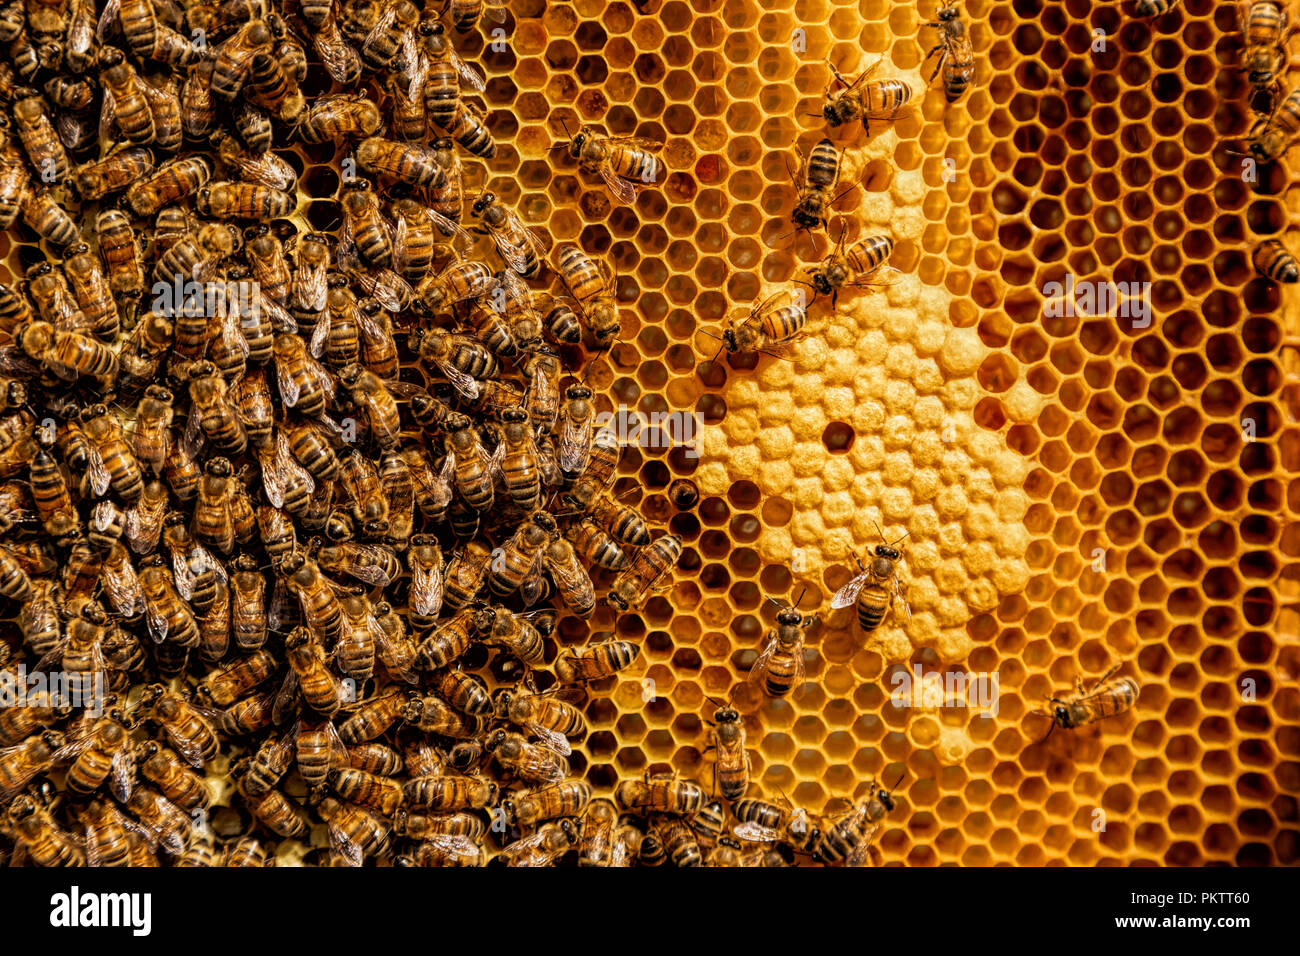 Honeycomb with working bees. Stock Photo